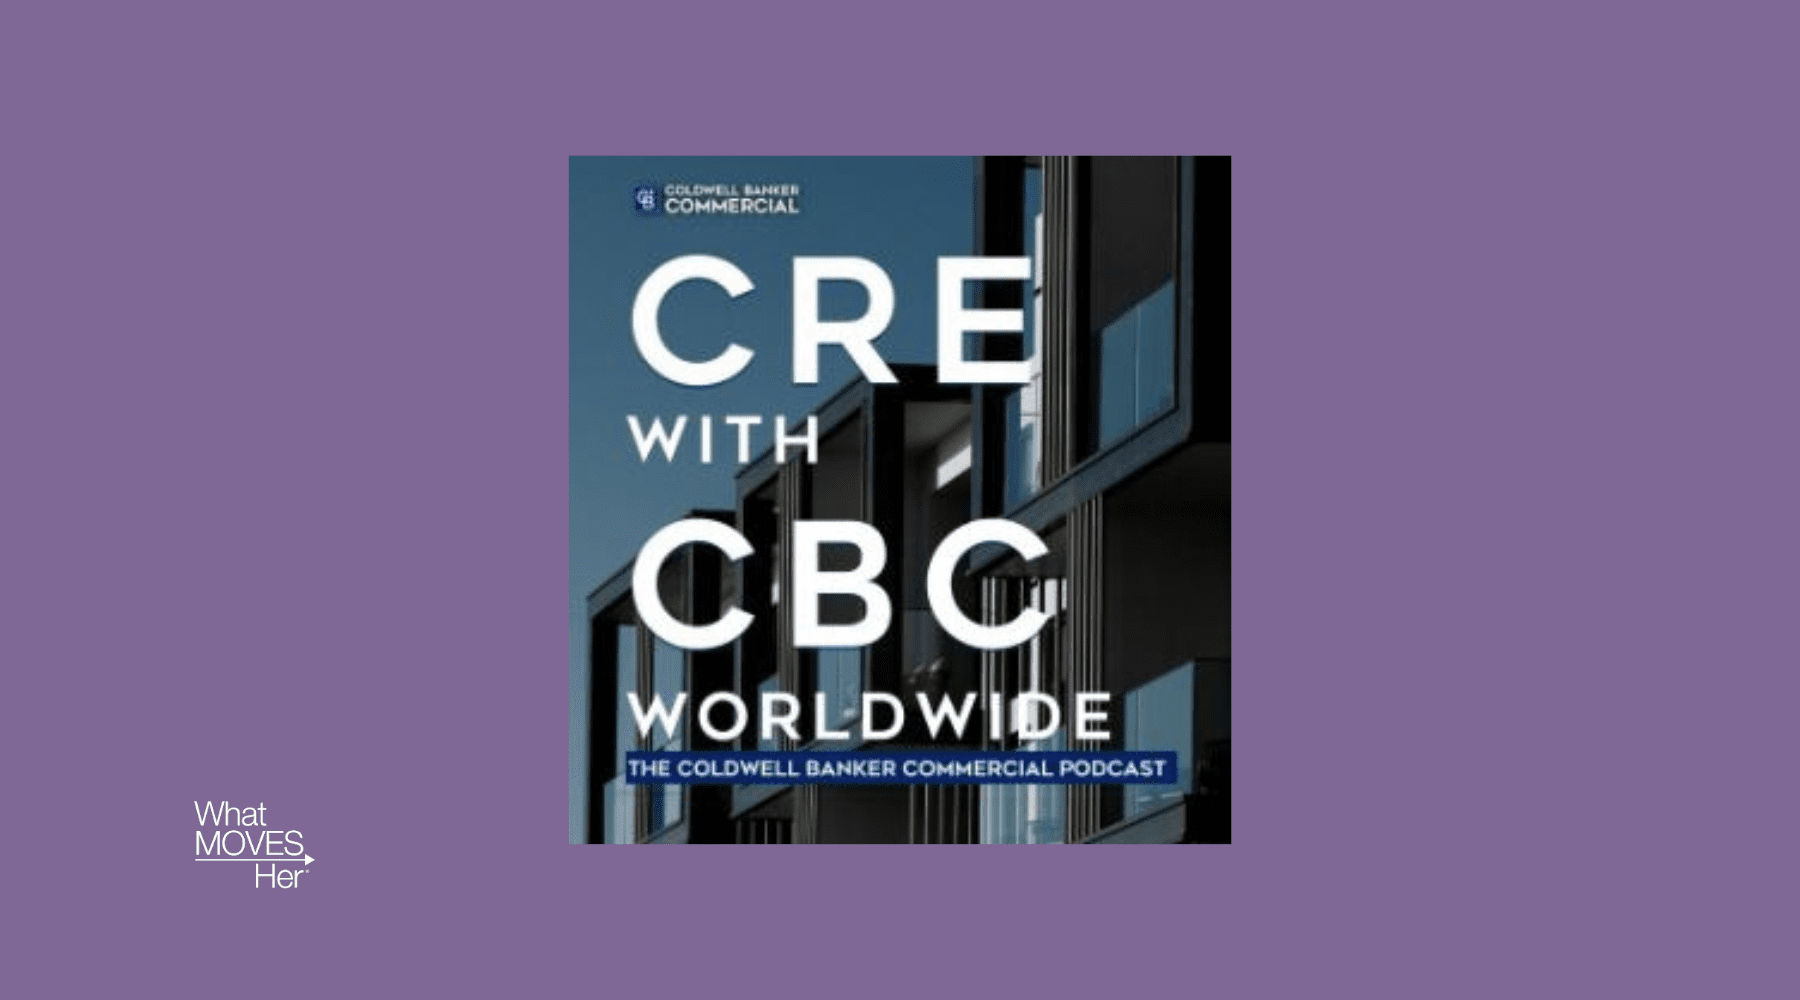 CRE with CBC Worldwide Podcast: Designing for Dignity: Creating Lactation Rooms that Support Working Mothers